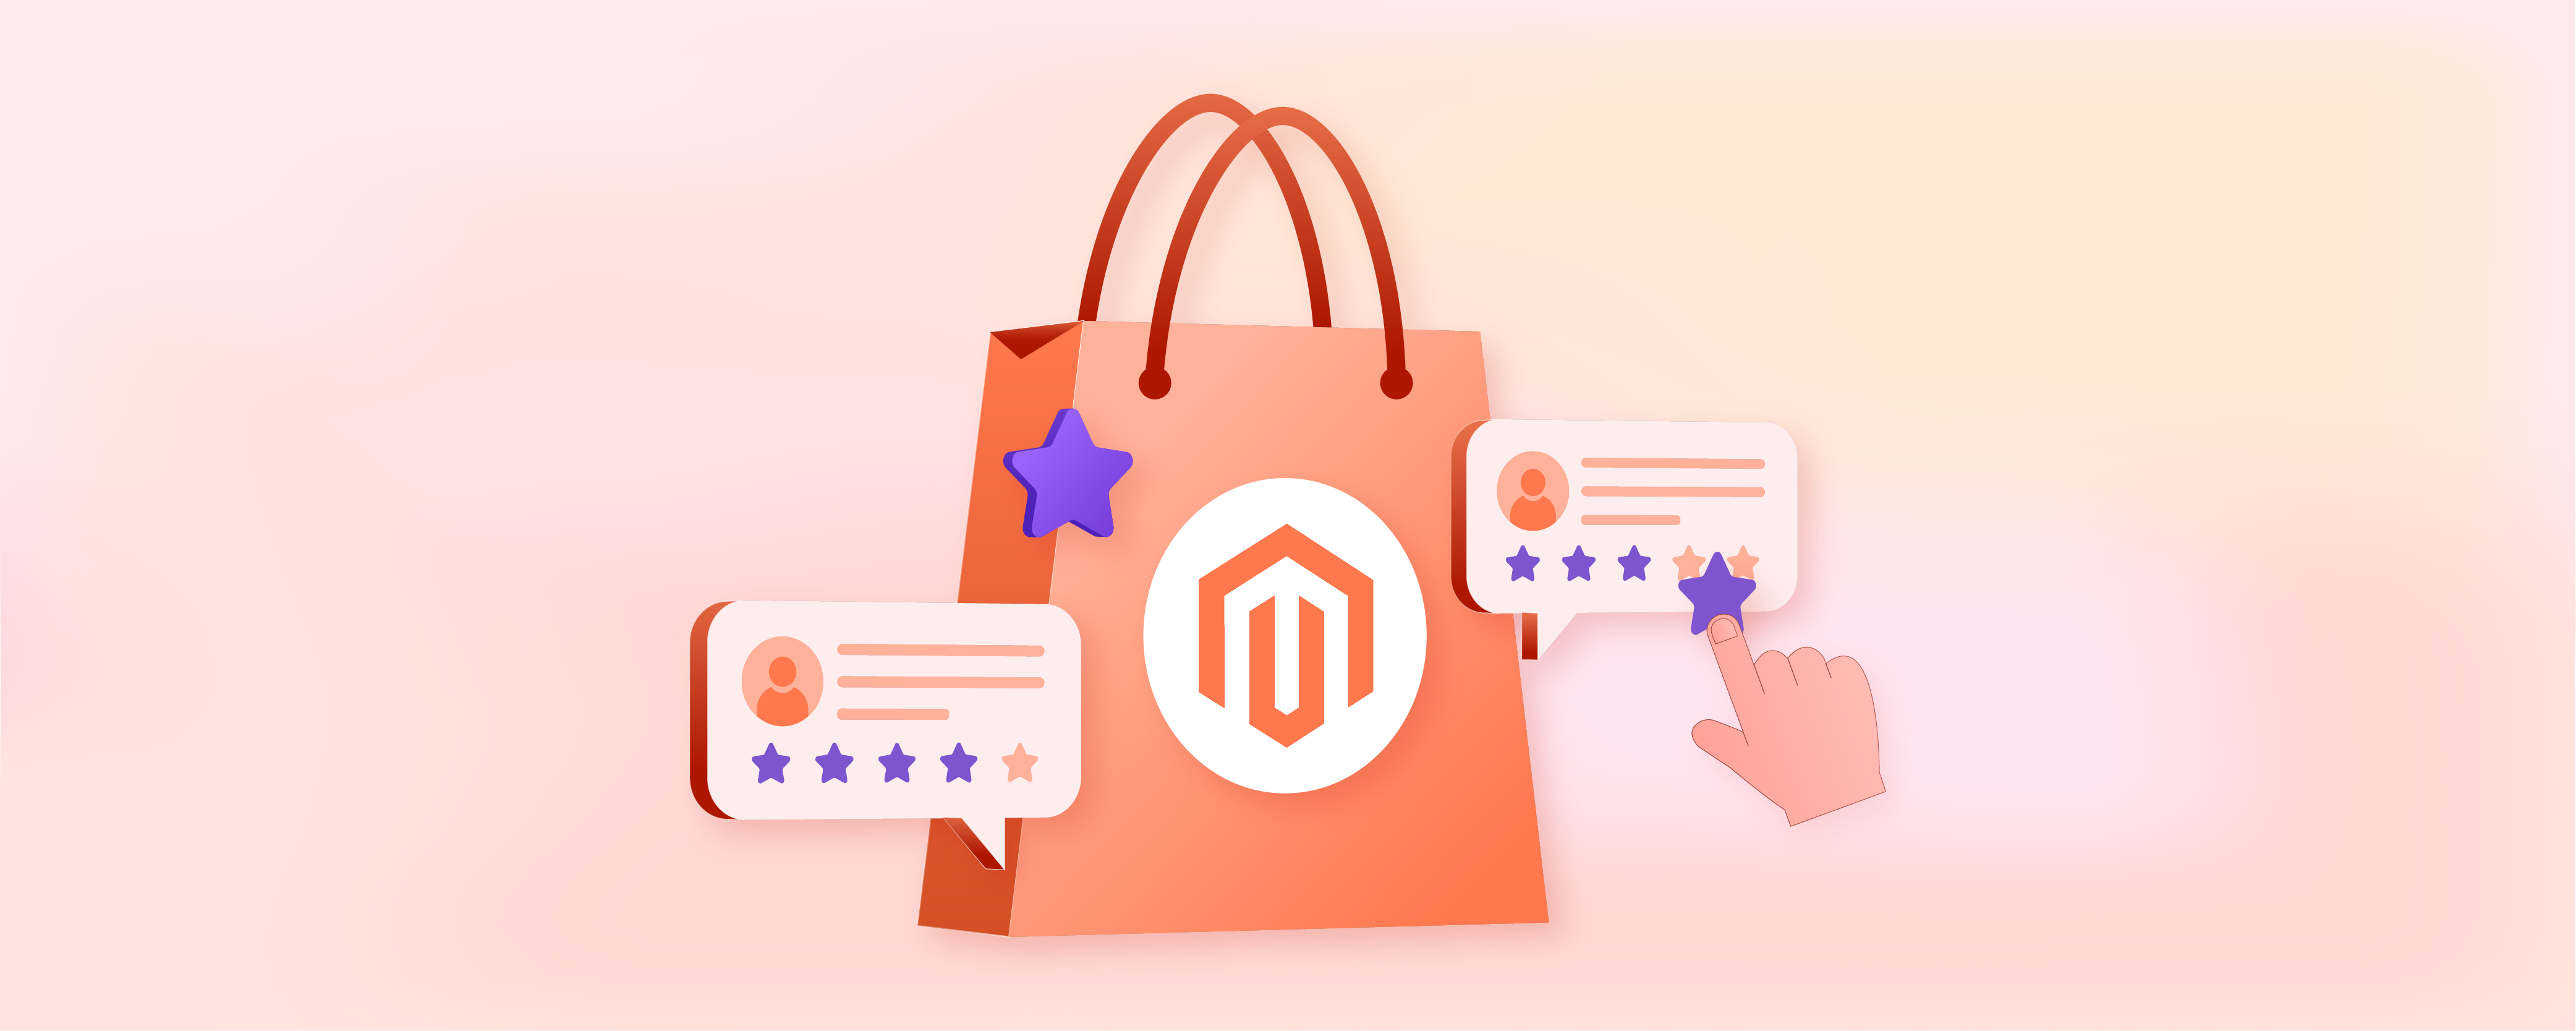 Magento Moderate Product Reviews for Approval or Rejection